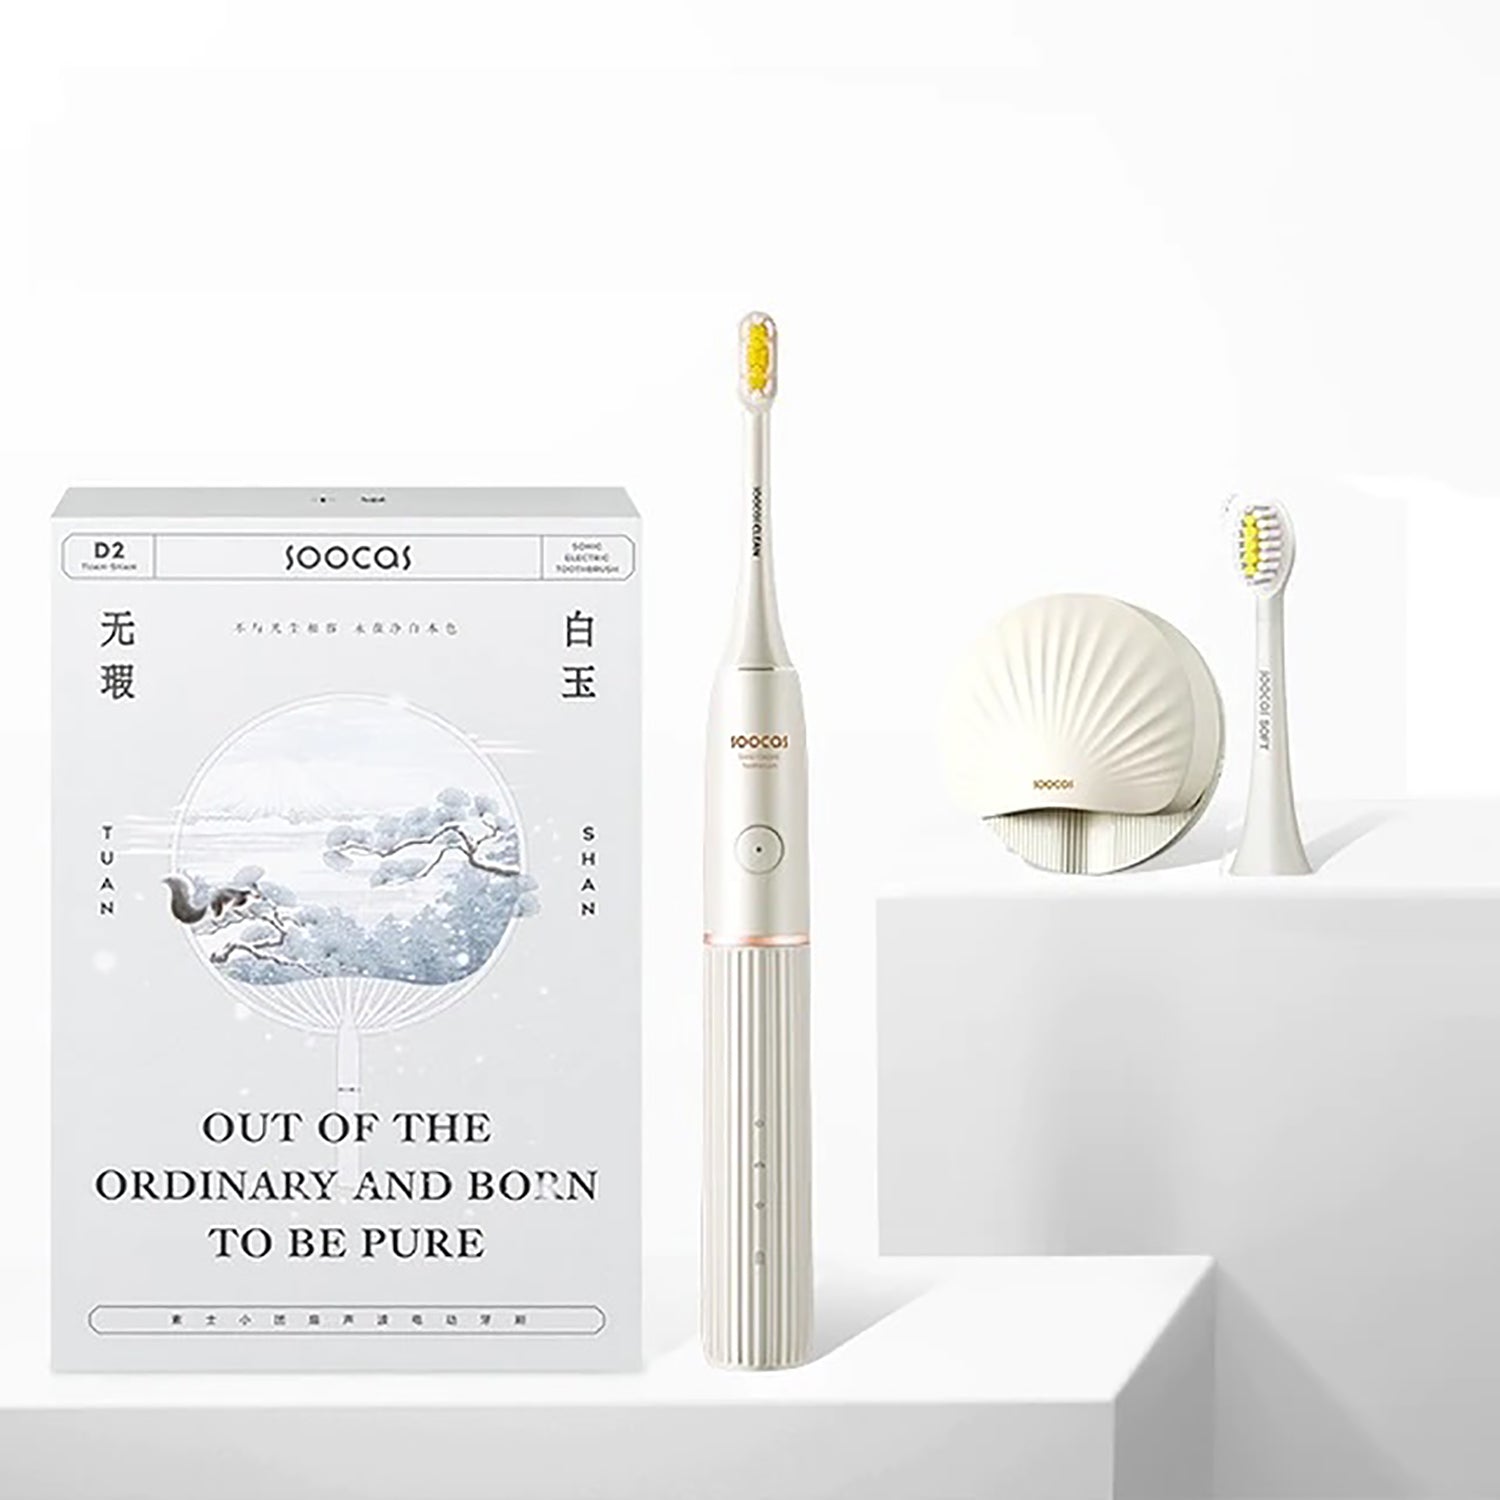 SOOCAS D2 Electric Toothbrush Sonic UVC Disinfect Toothbrush IPX7 Waterproof 3 Brushing Mode USB Rechargeable Electric Toothbrush Oral Care SOOCAS White 